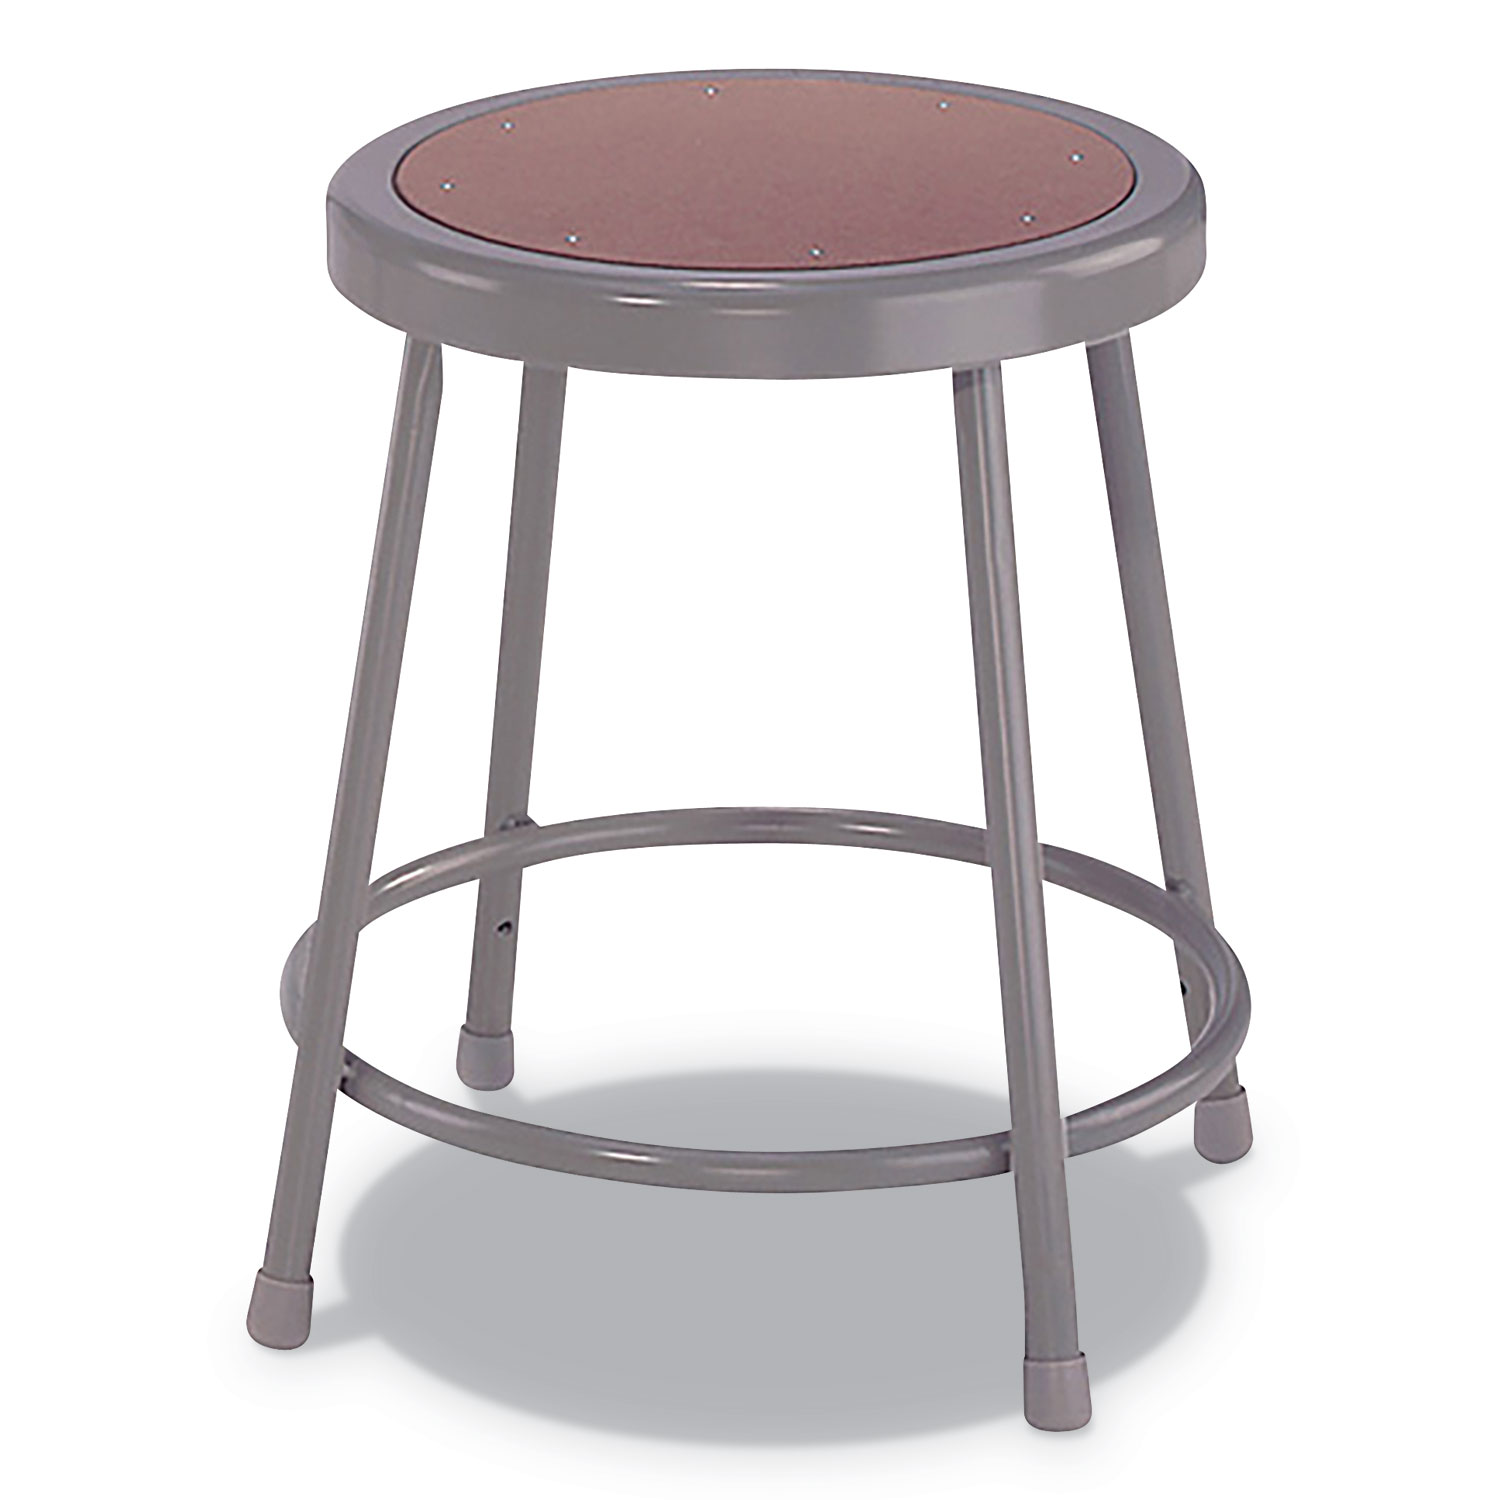  Alera ALEIS6618G Industrial Metal Shop Stool, 18 Seat Height, Supports up to 300 lbs., Brown Seat/Gray Back, Gray Base (ALEIS6618G) 